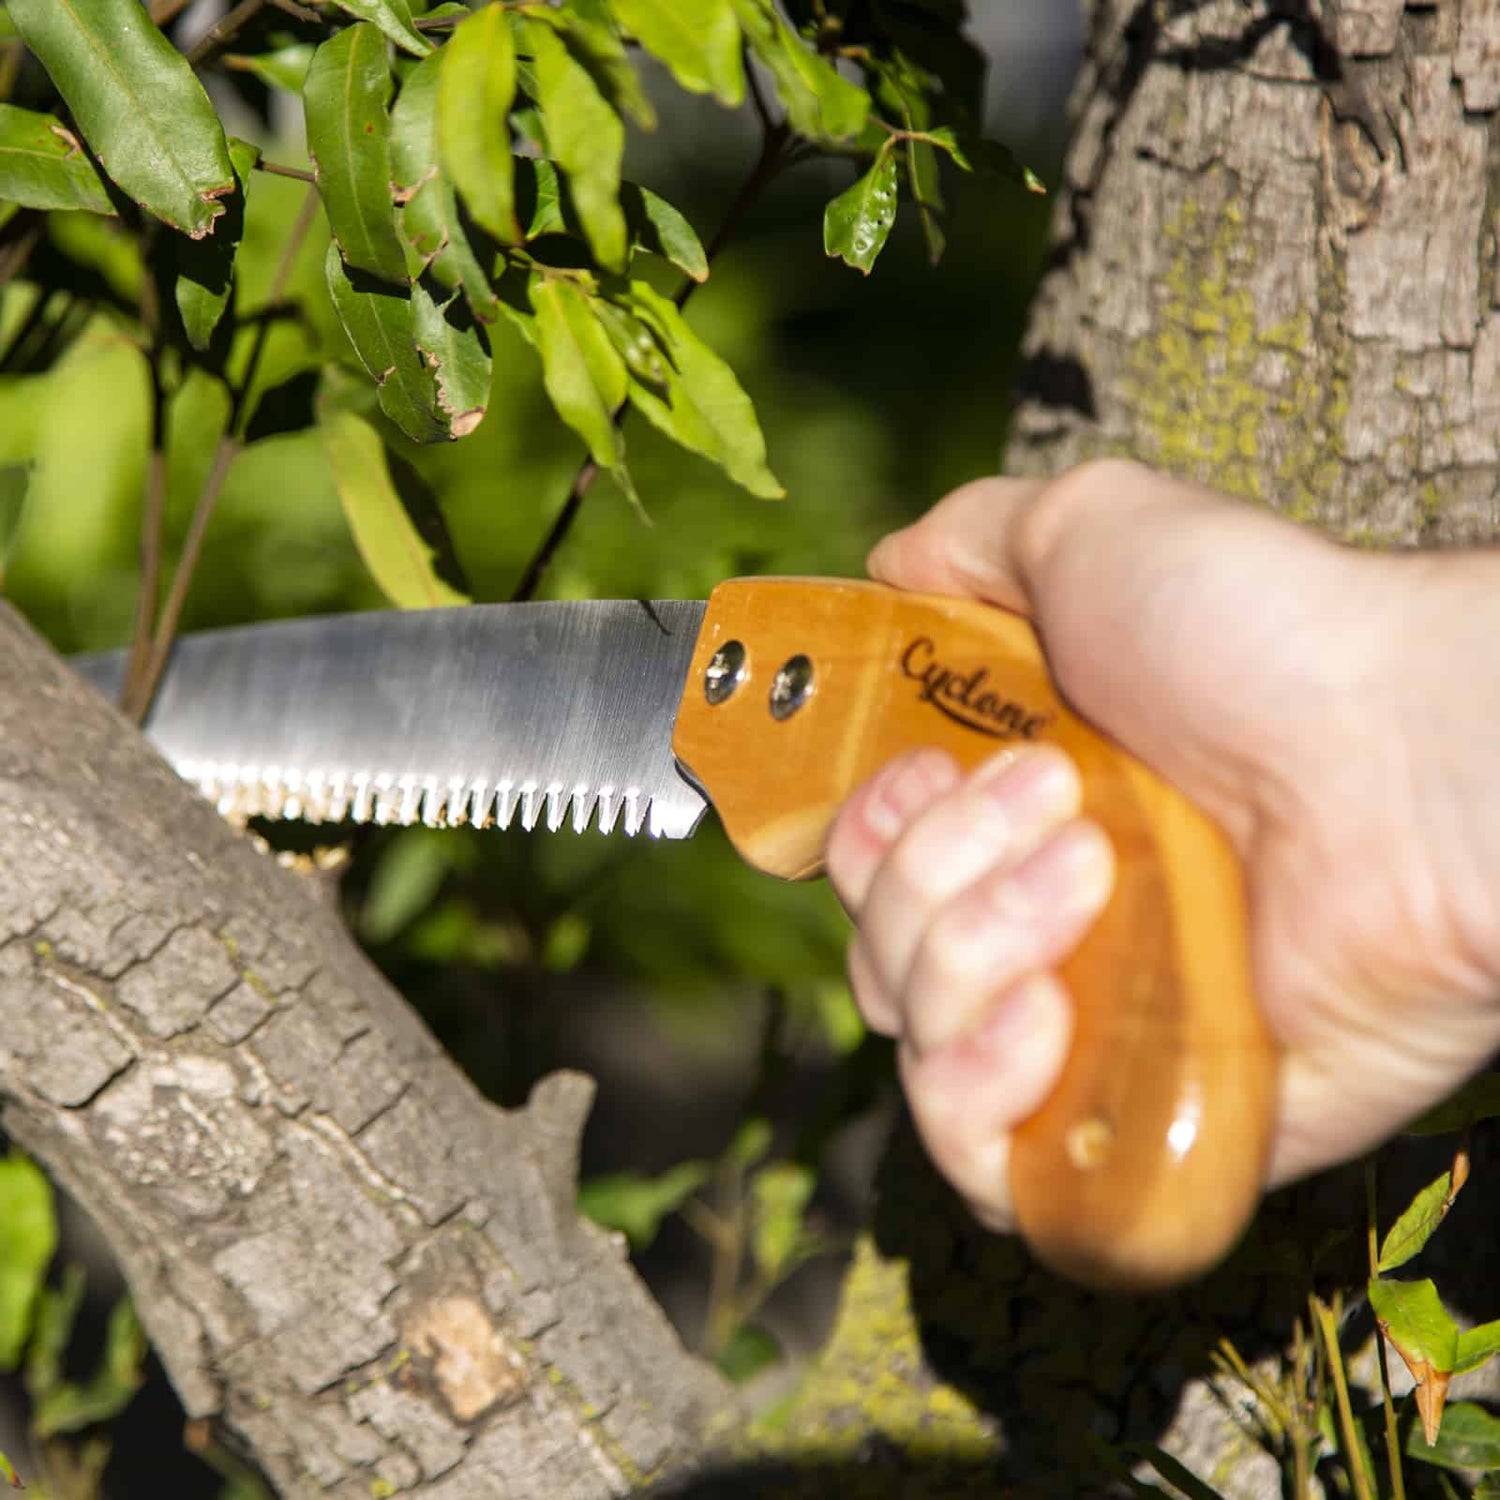 Straight Pruning Saw